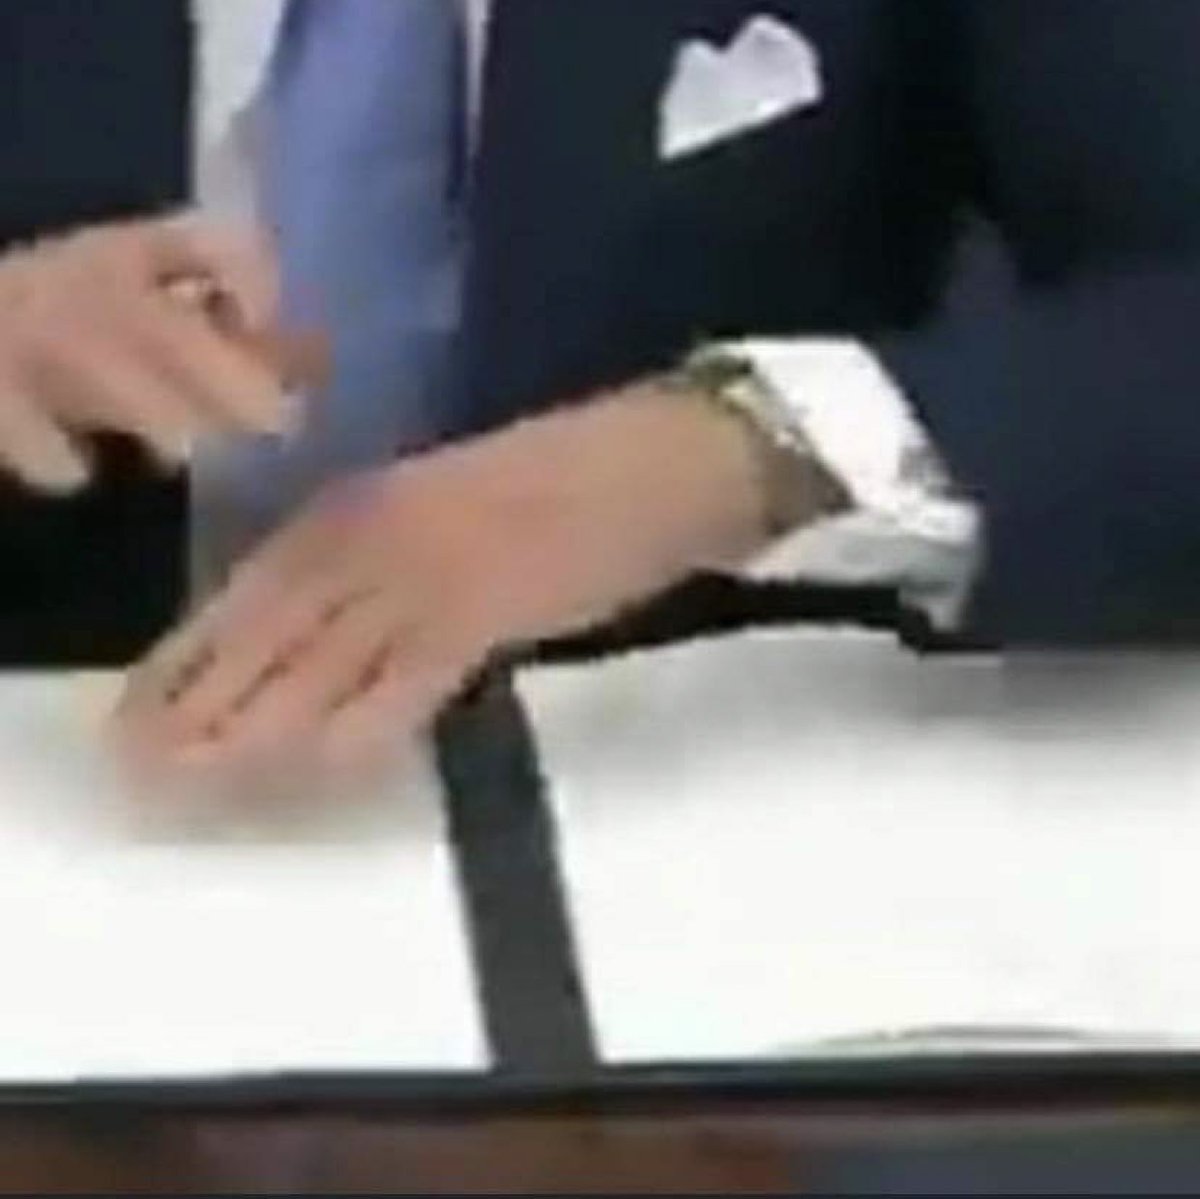 In the next photo (taken from the original video of him signing EO’s) you can see from every angle of the video that these pages are blank, and to debunk the whole camera overexposure hypothesis which I originally thought, where is the seal that is supposed to be on the page?...